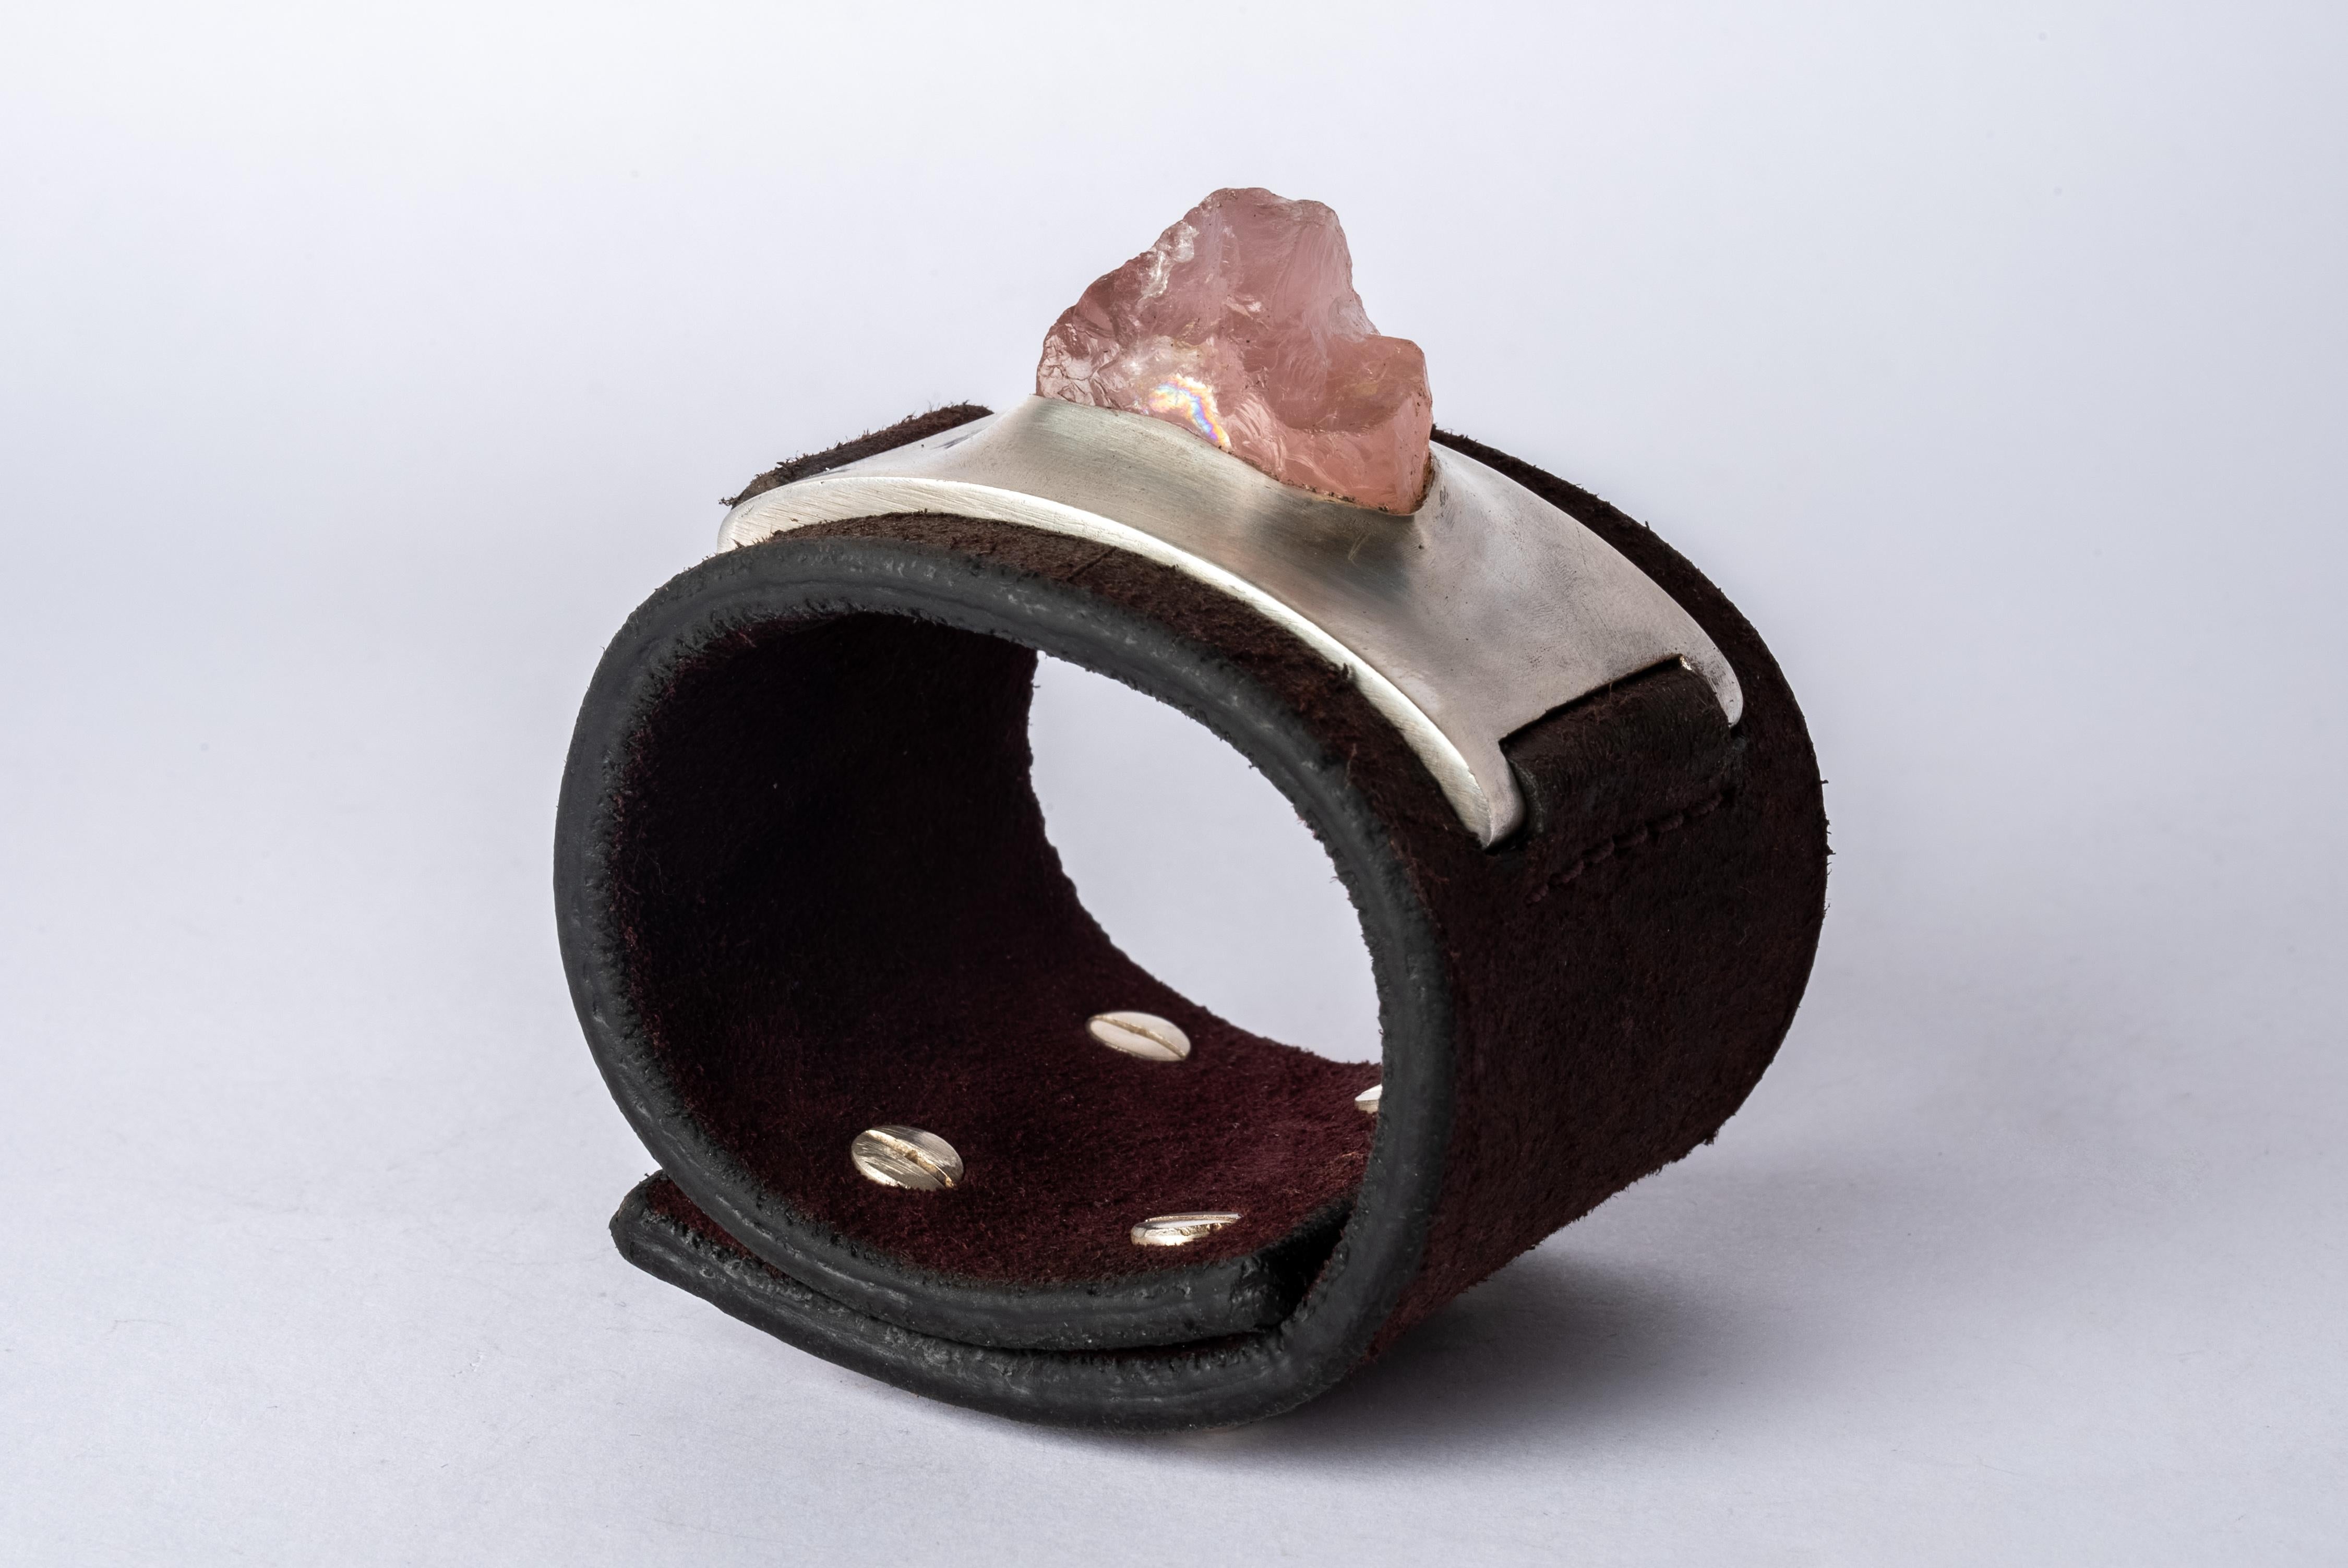 Bracelet in brass, rose quartz, and purple victoria leather. This item is made with a naturally occurring element and will vary from the photograph you see. Each piece is unique and this is what makes it special.
Bracelet band width: 50 mm